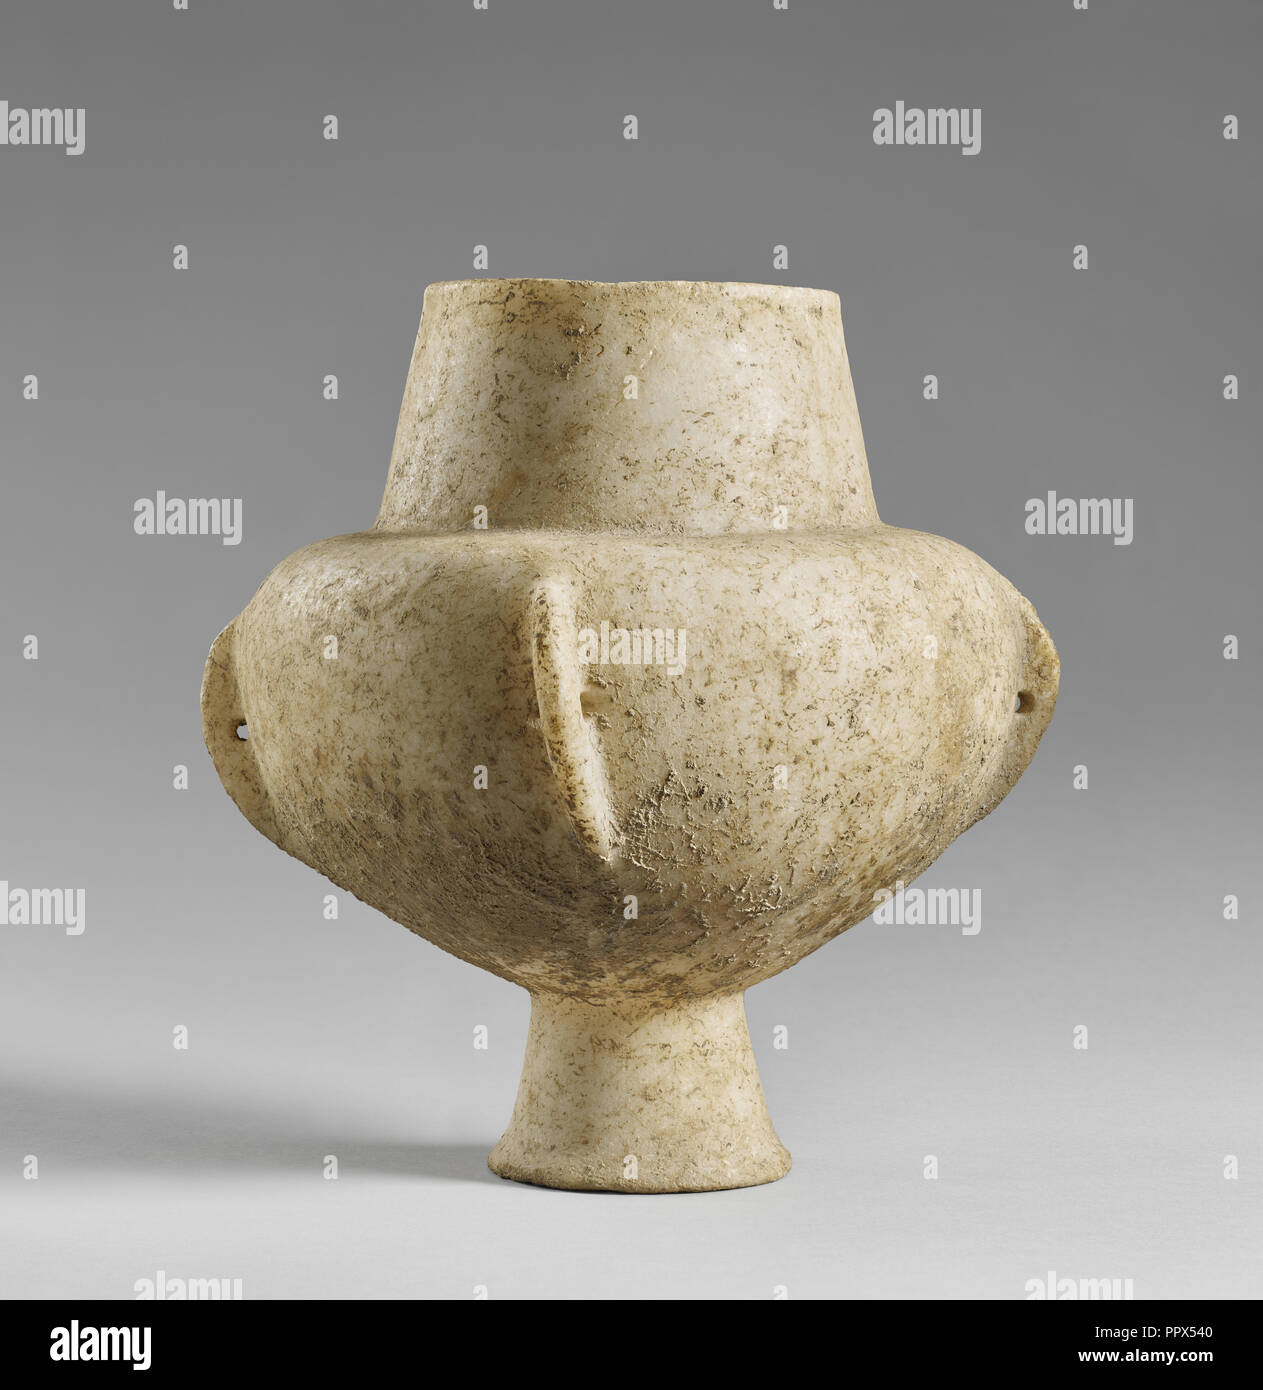 Storage Jar with a Pedestal Foot; Attributed to Kandila Sculptor B, Cycladic, active about 3000 - 2800 B.C., Cyclades, Greece Stock Photo